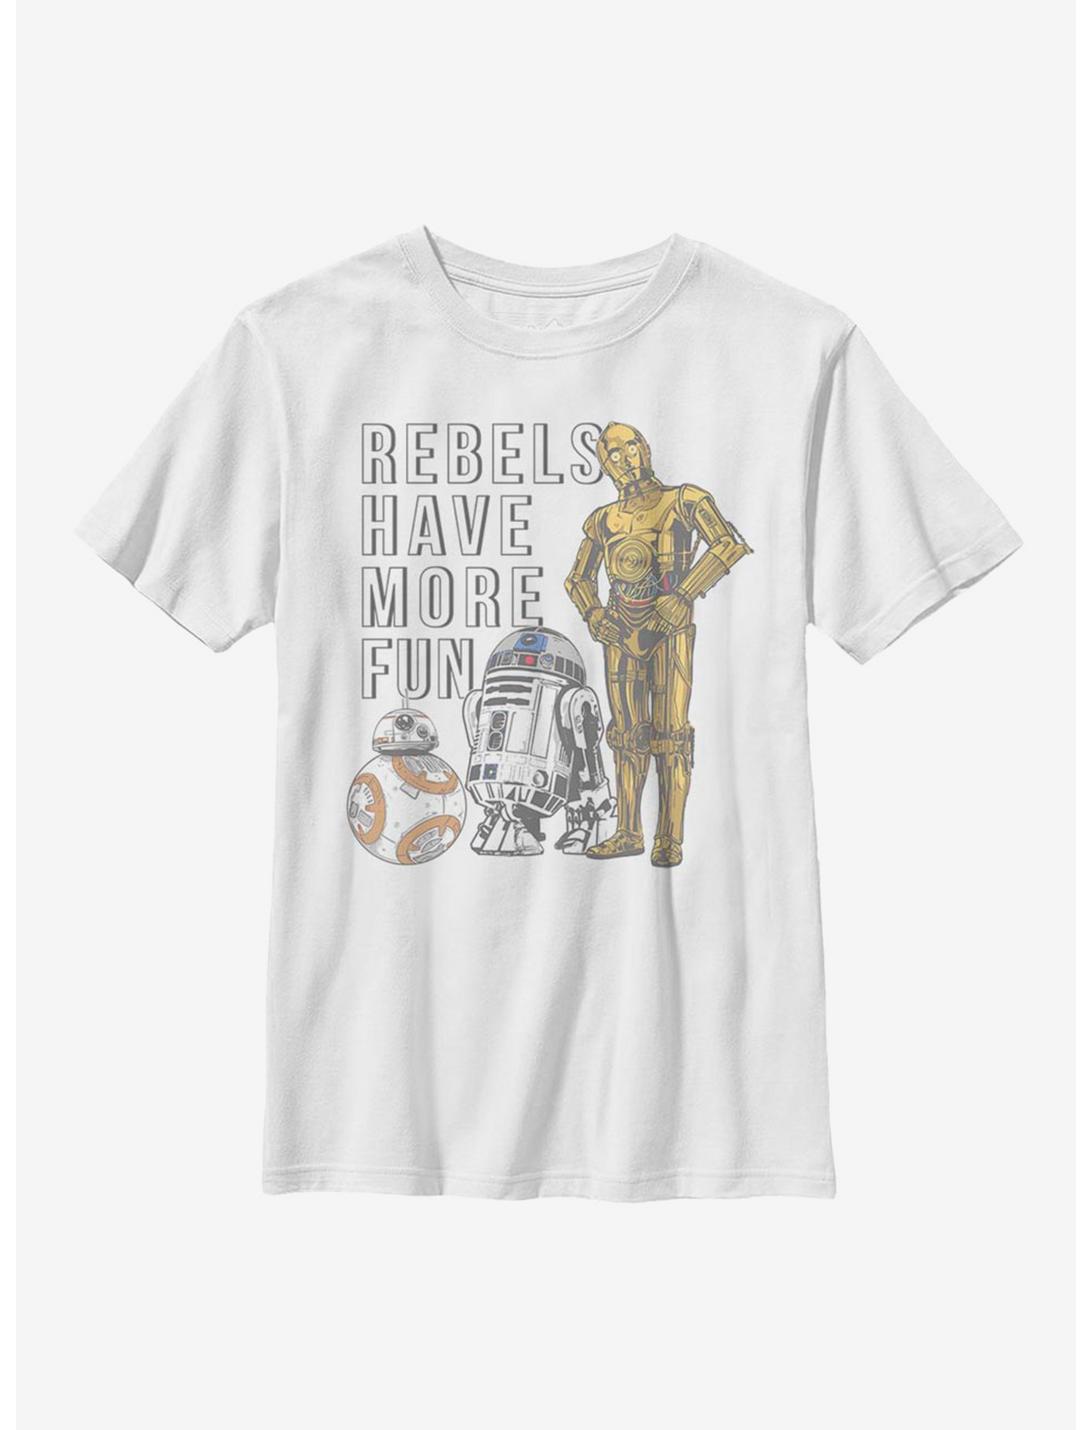 Star Wars Episode VIII The Last Jedi Rebels Youth T-Shirt, WHITE, hi-res